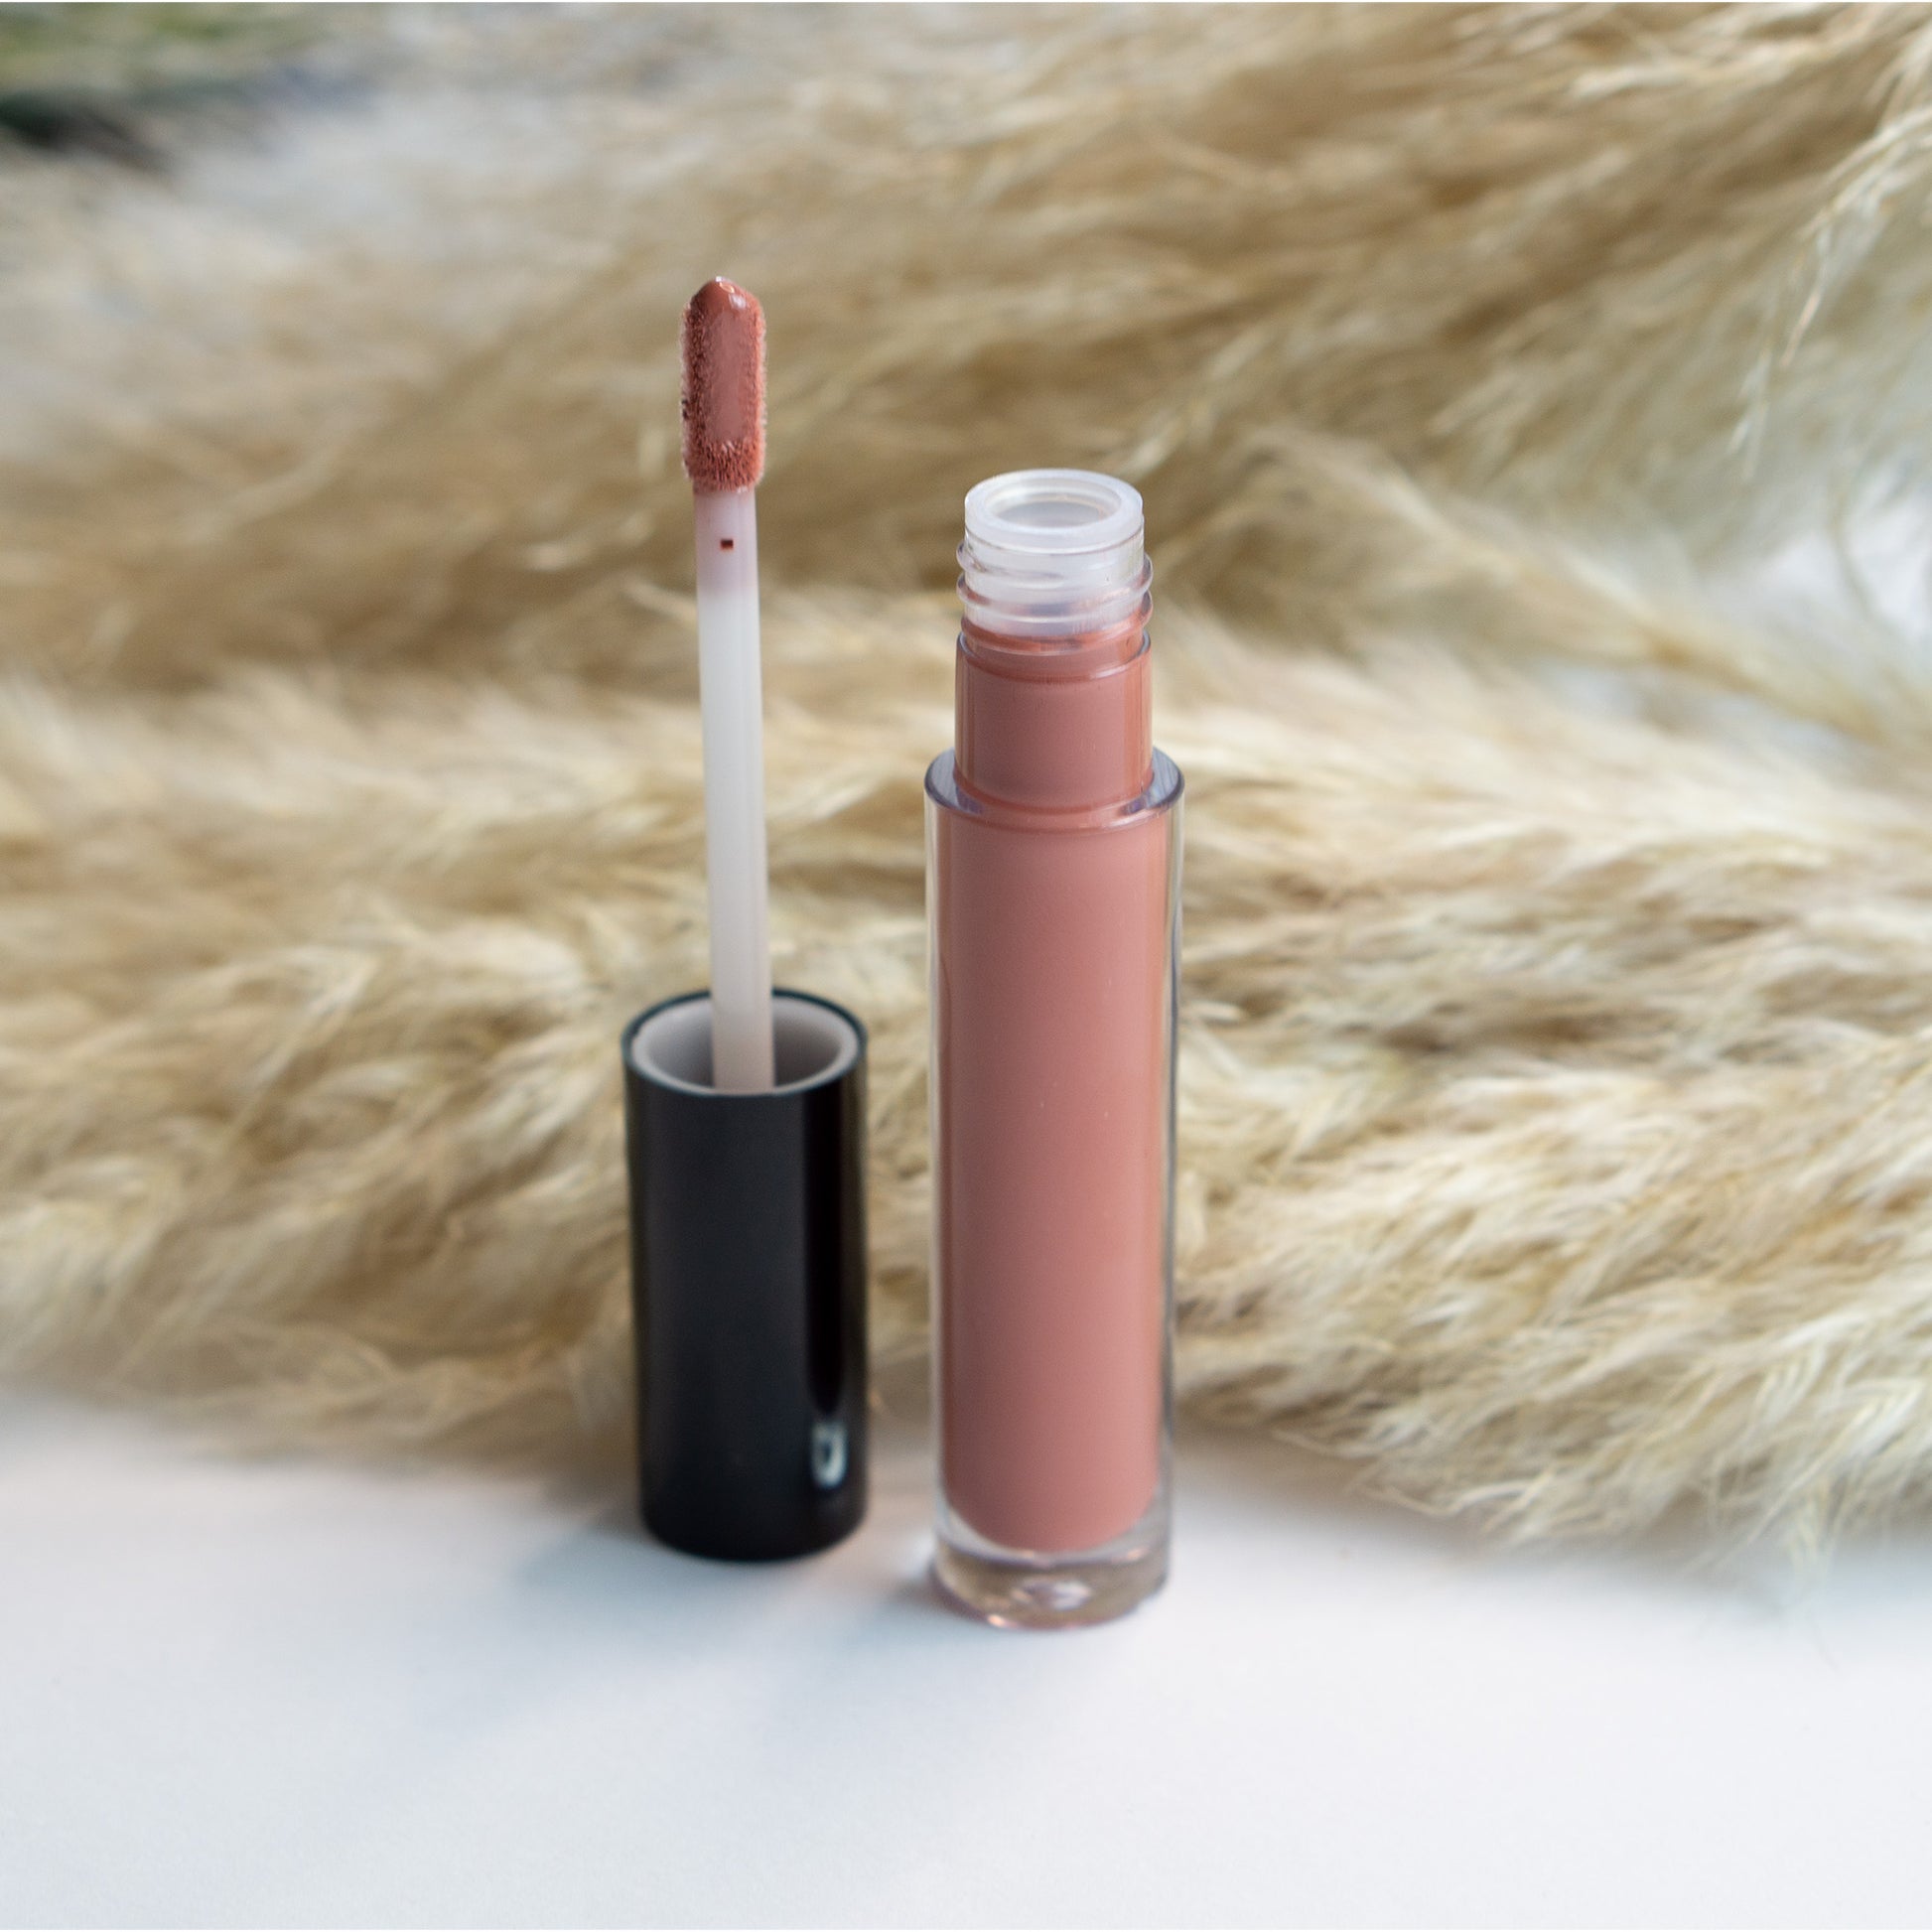 Indulge in luxury and sophistication with Cruisin Organics Dripping Gold Lip Gloss. Made from natural ingredients, this gloss nourishes and softens your lips while giving them a lustrous golden sheen. Step up your lip game with a long-lasting, cruelty-free gloss that doesn't compromise on quality or ethics.